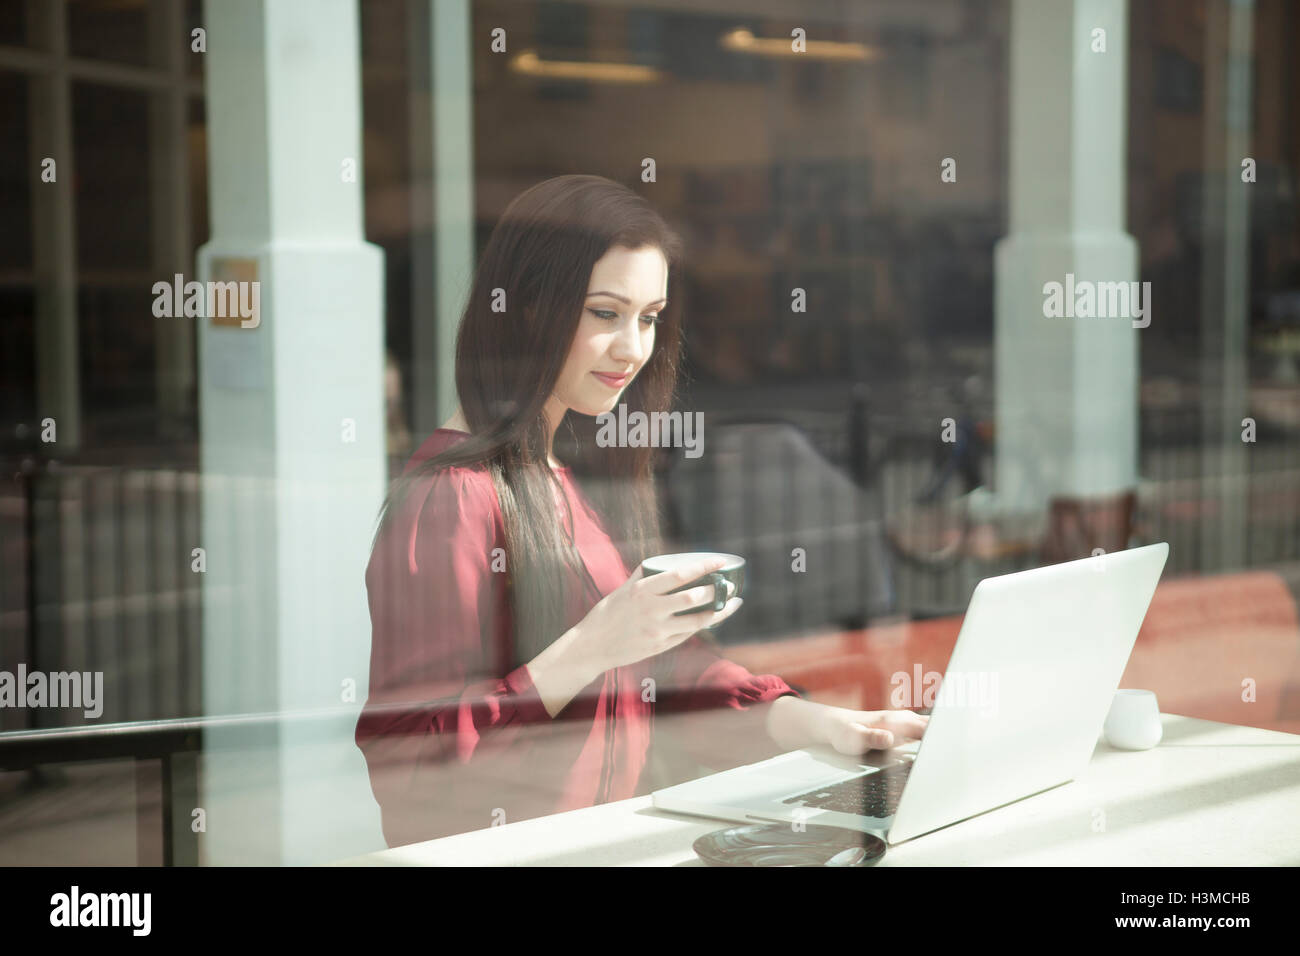 Businesswoman working with laptop in cafe Banque D'Images